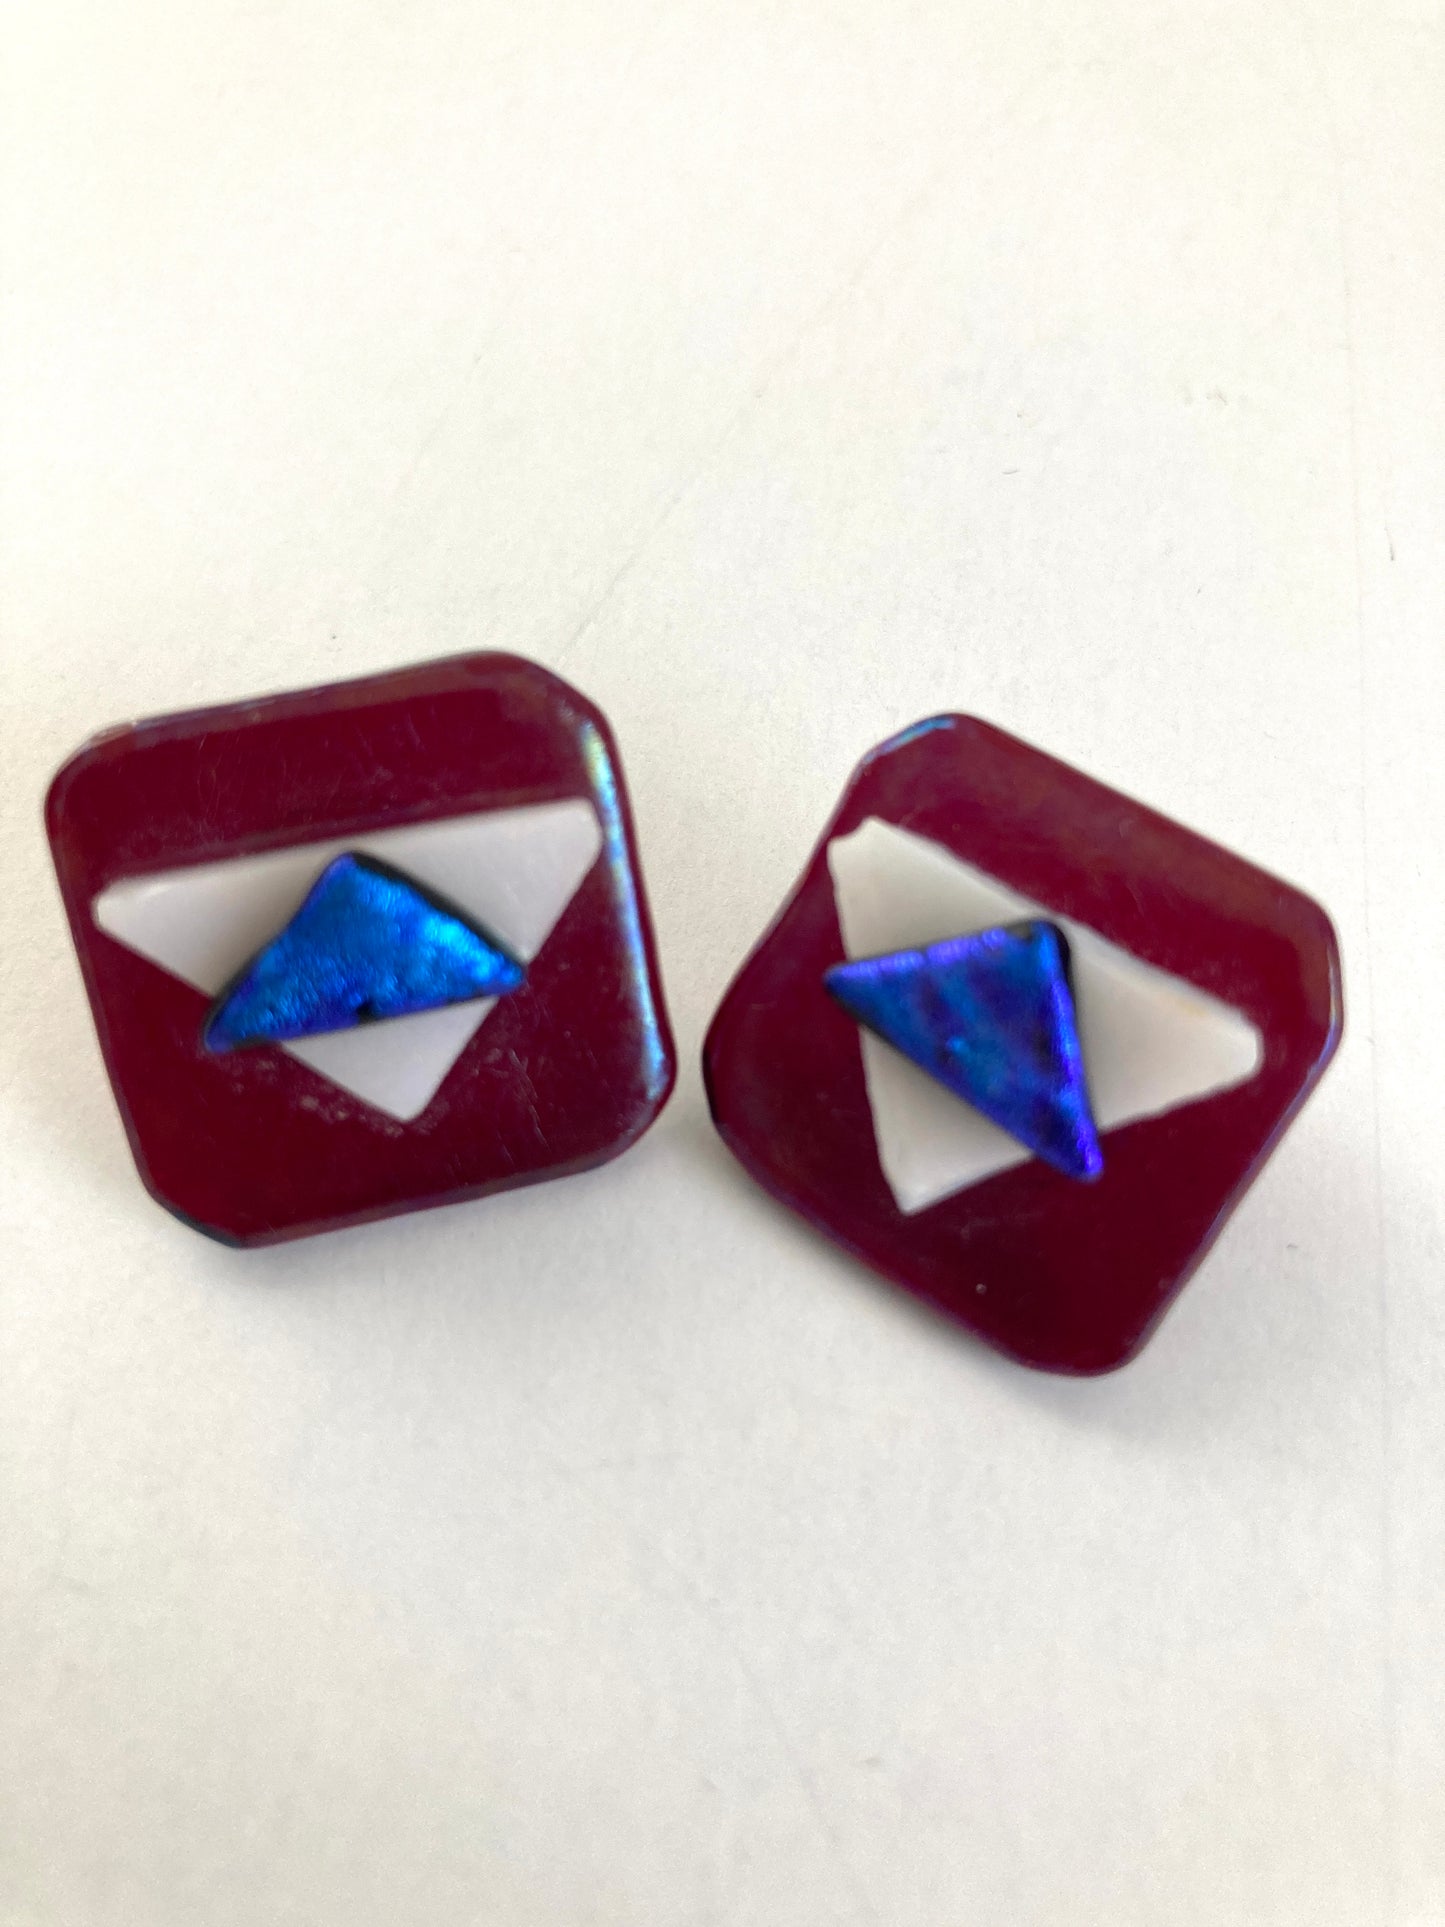 Dichroic Glass Earrings in Red, White, and Blue